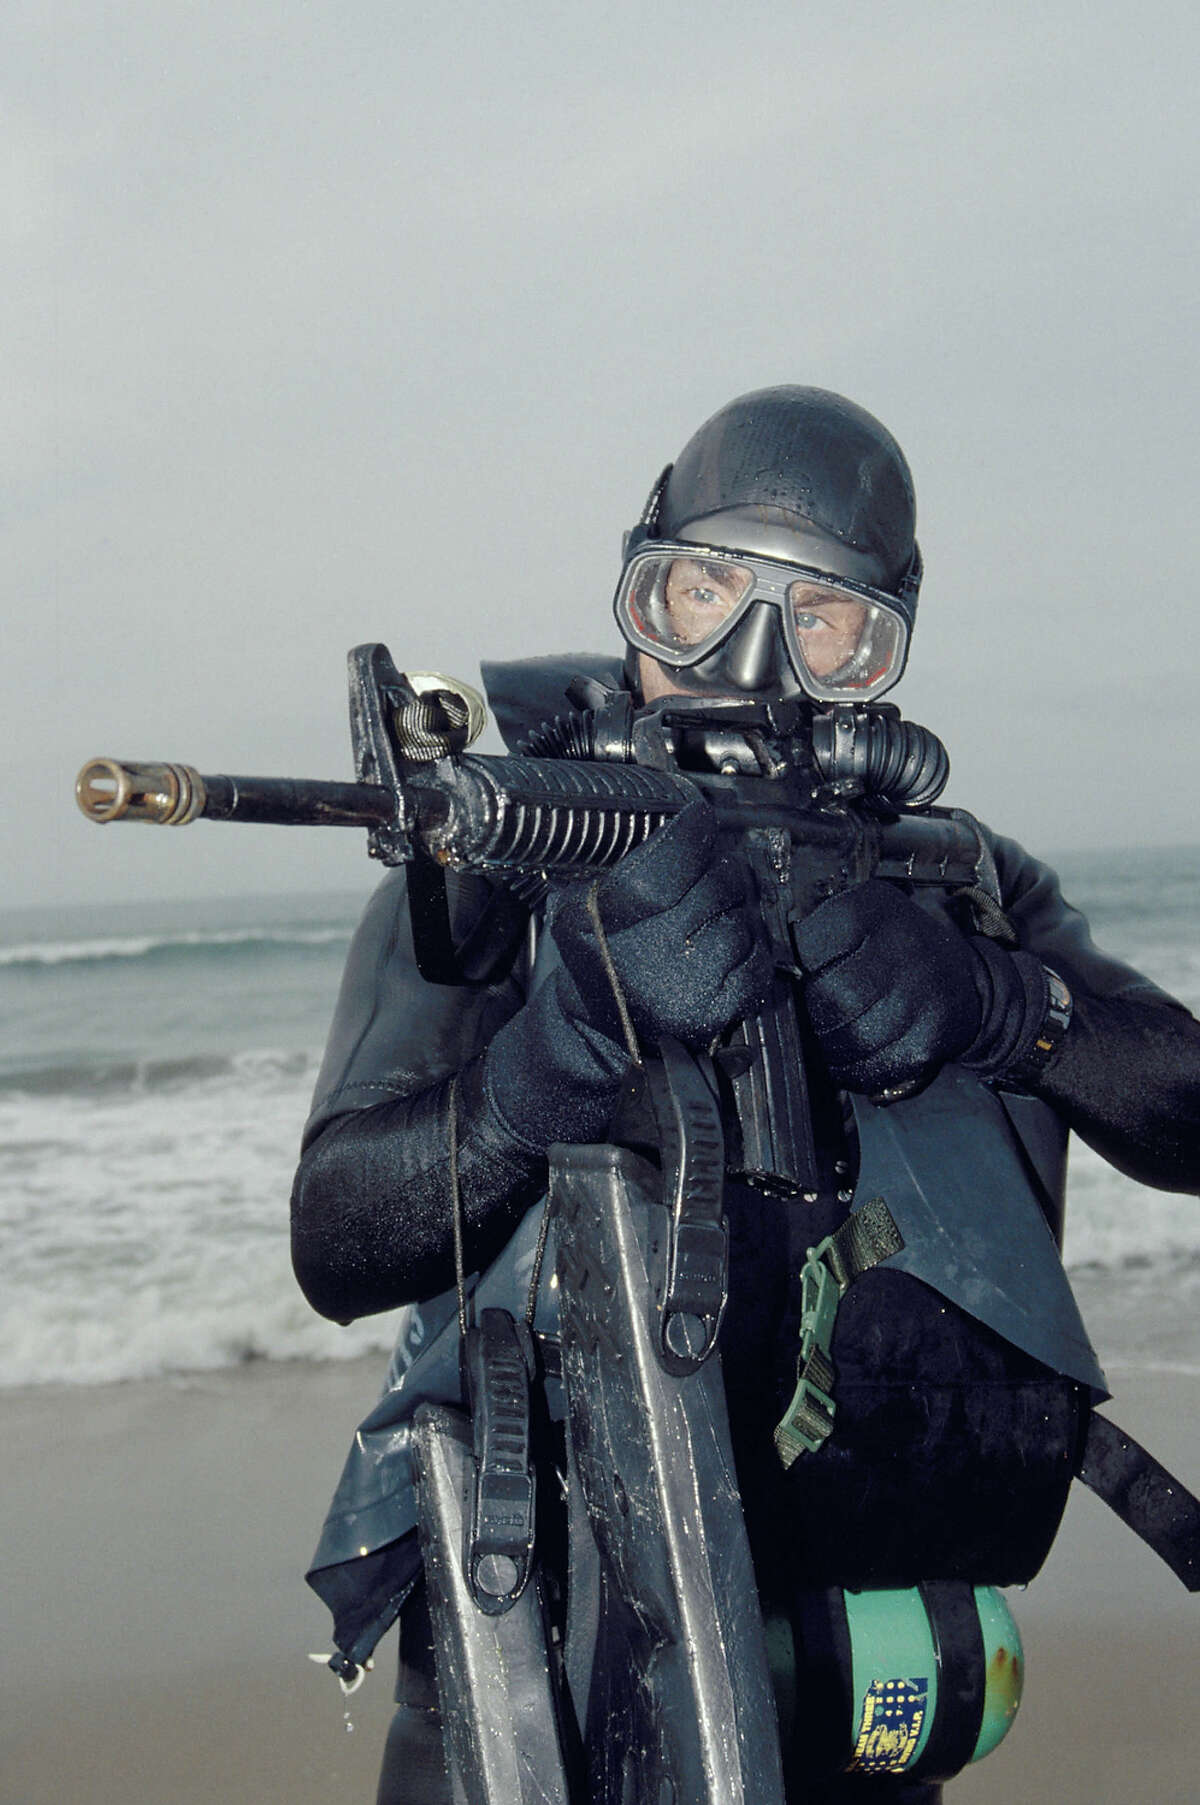 Navy SEAL, part of US Special Forces train using underwater equipment.